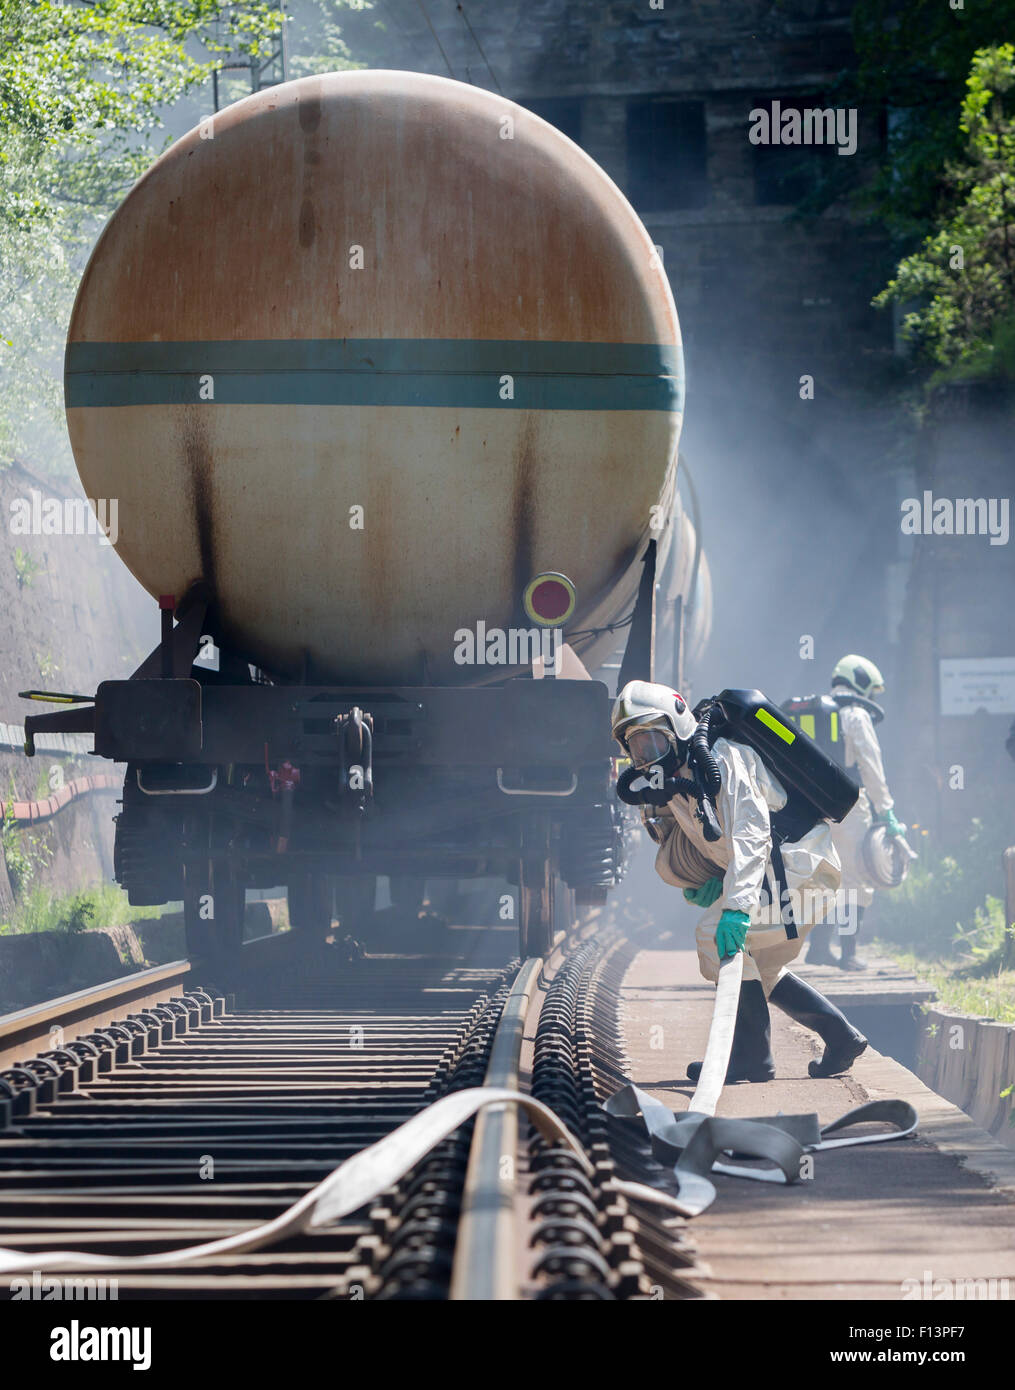 A team working with toxic acids and chemicals is approaching a chemical cargo train crash near Sofia, Bulgaria. Teams from Fire  Stock Photo